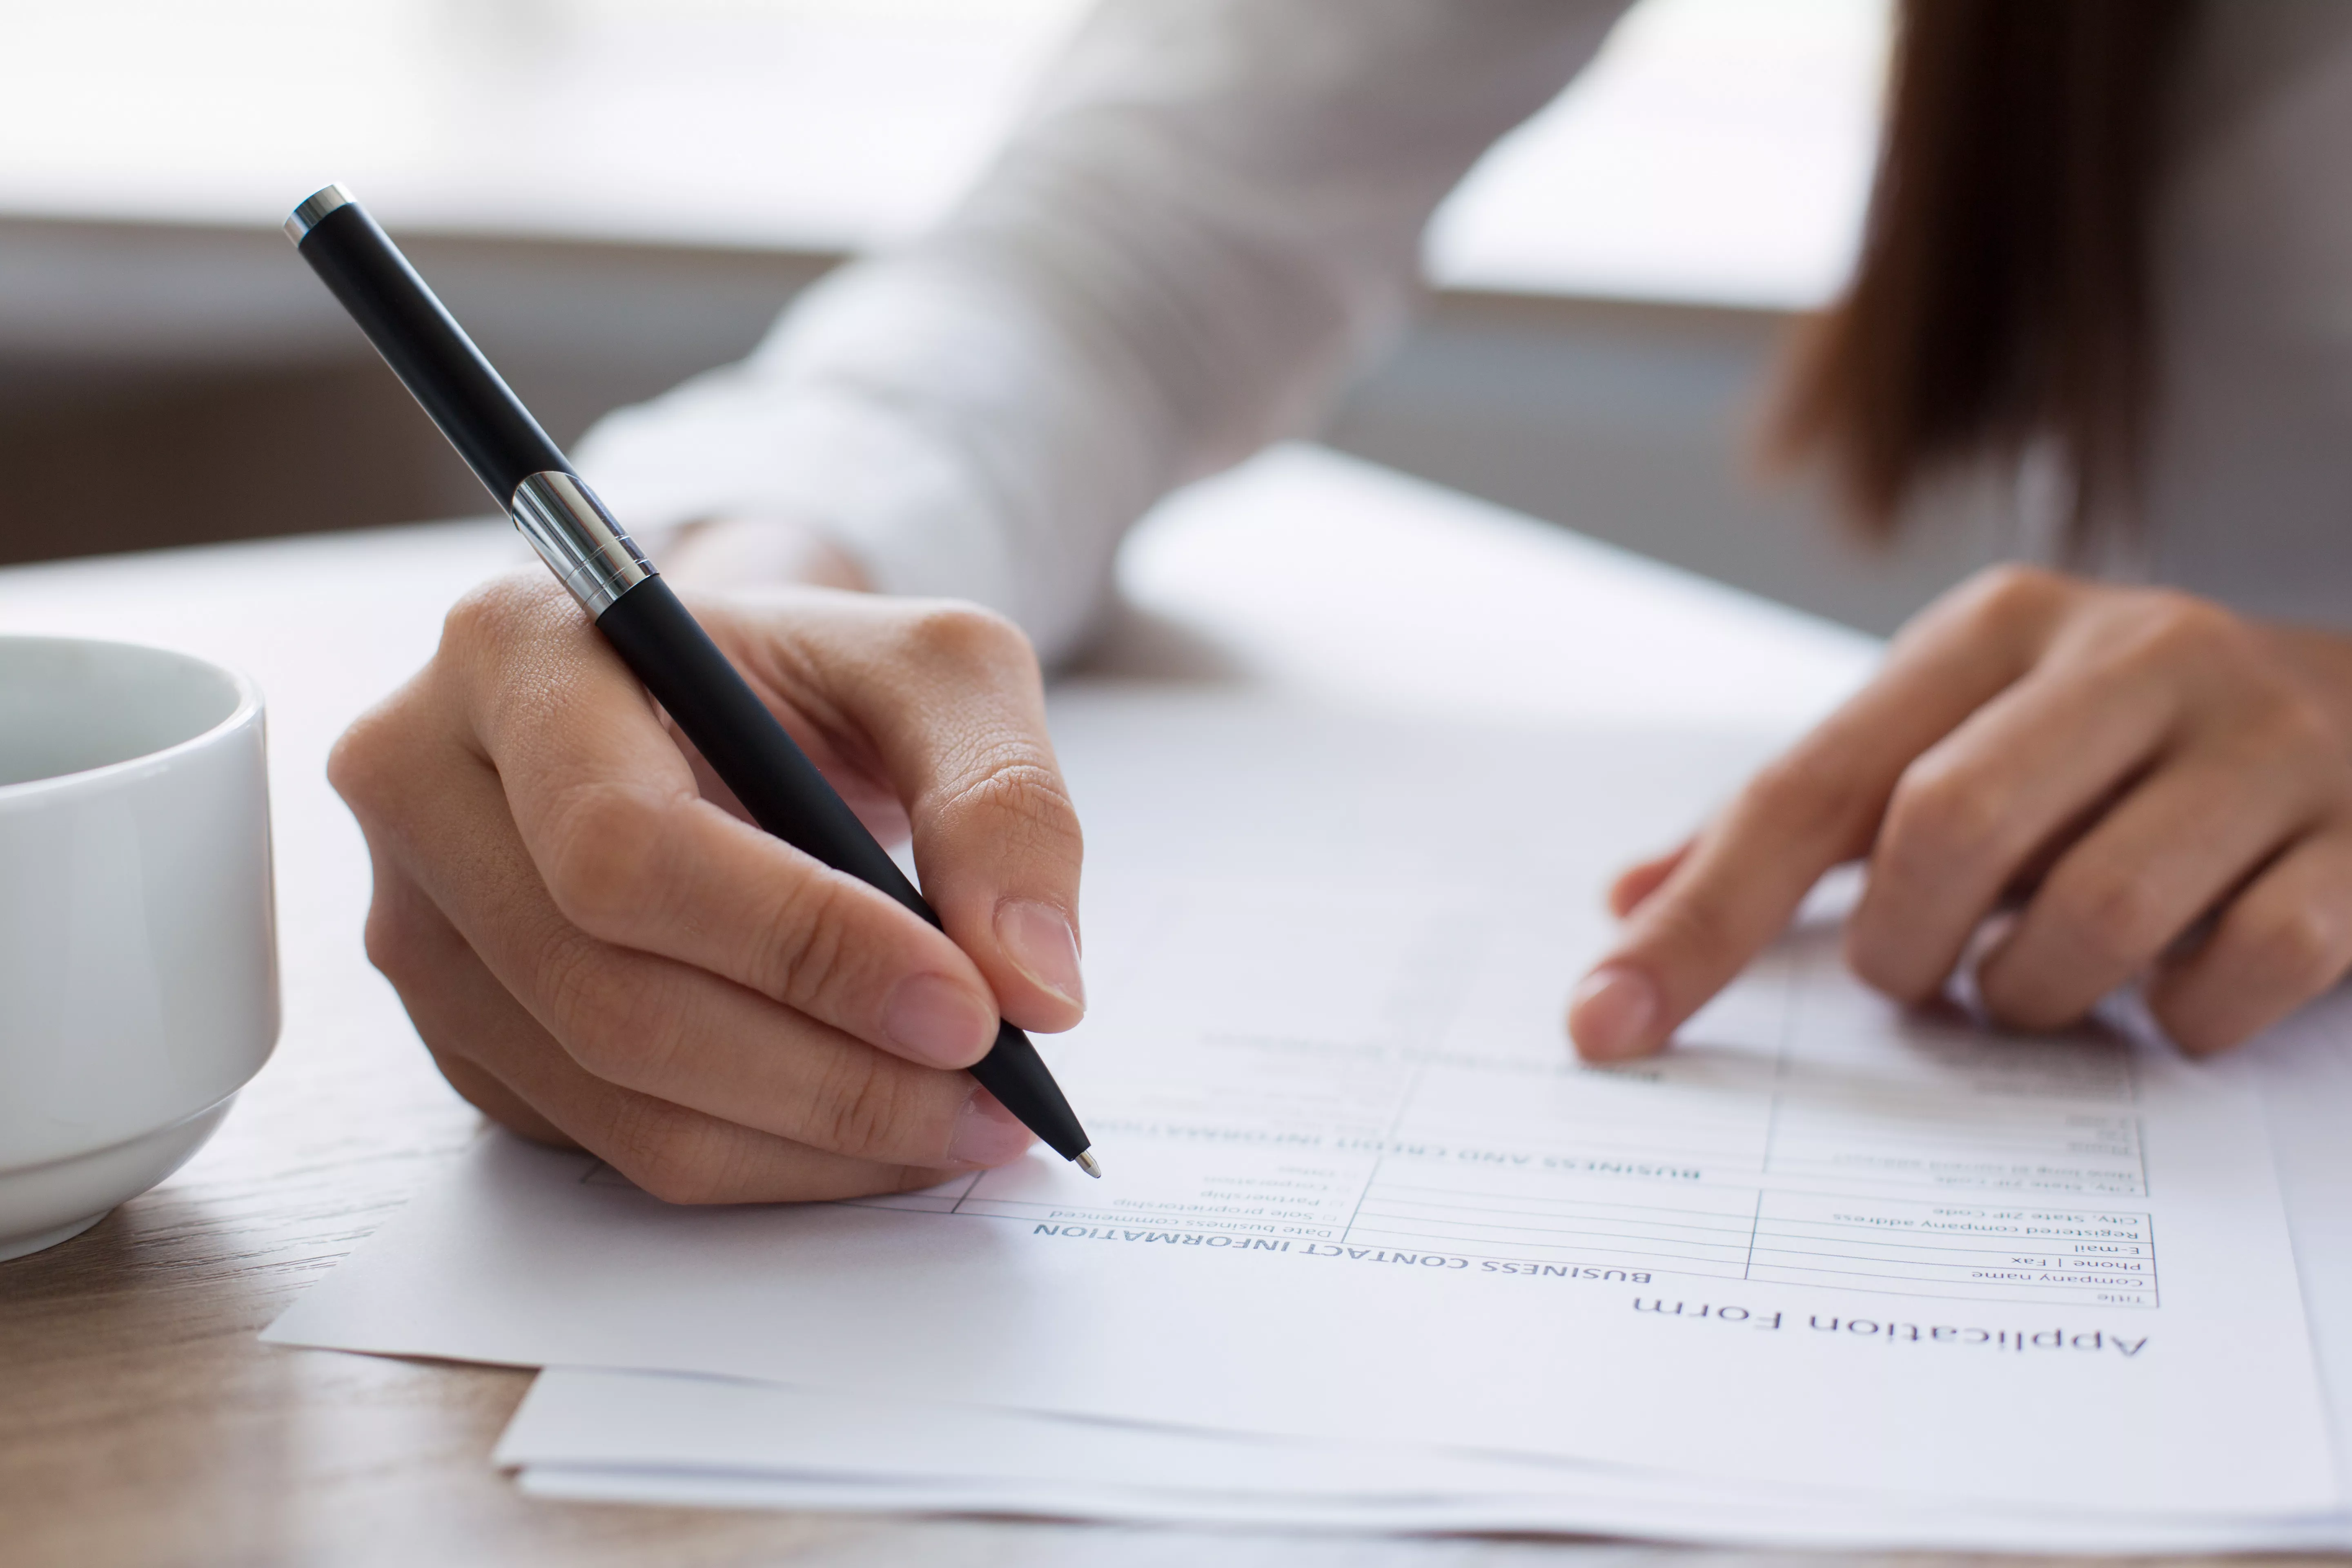 Close-up image of a pair of hands. One is holding a pen and writing on a sheet of paper, while the other is resting on the paper while pointing to something. To the left is a mug of coffee. Image is used to illustrate someone completing an application form